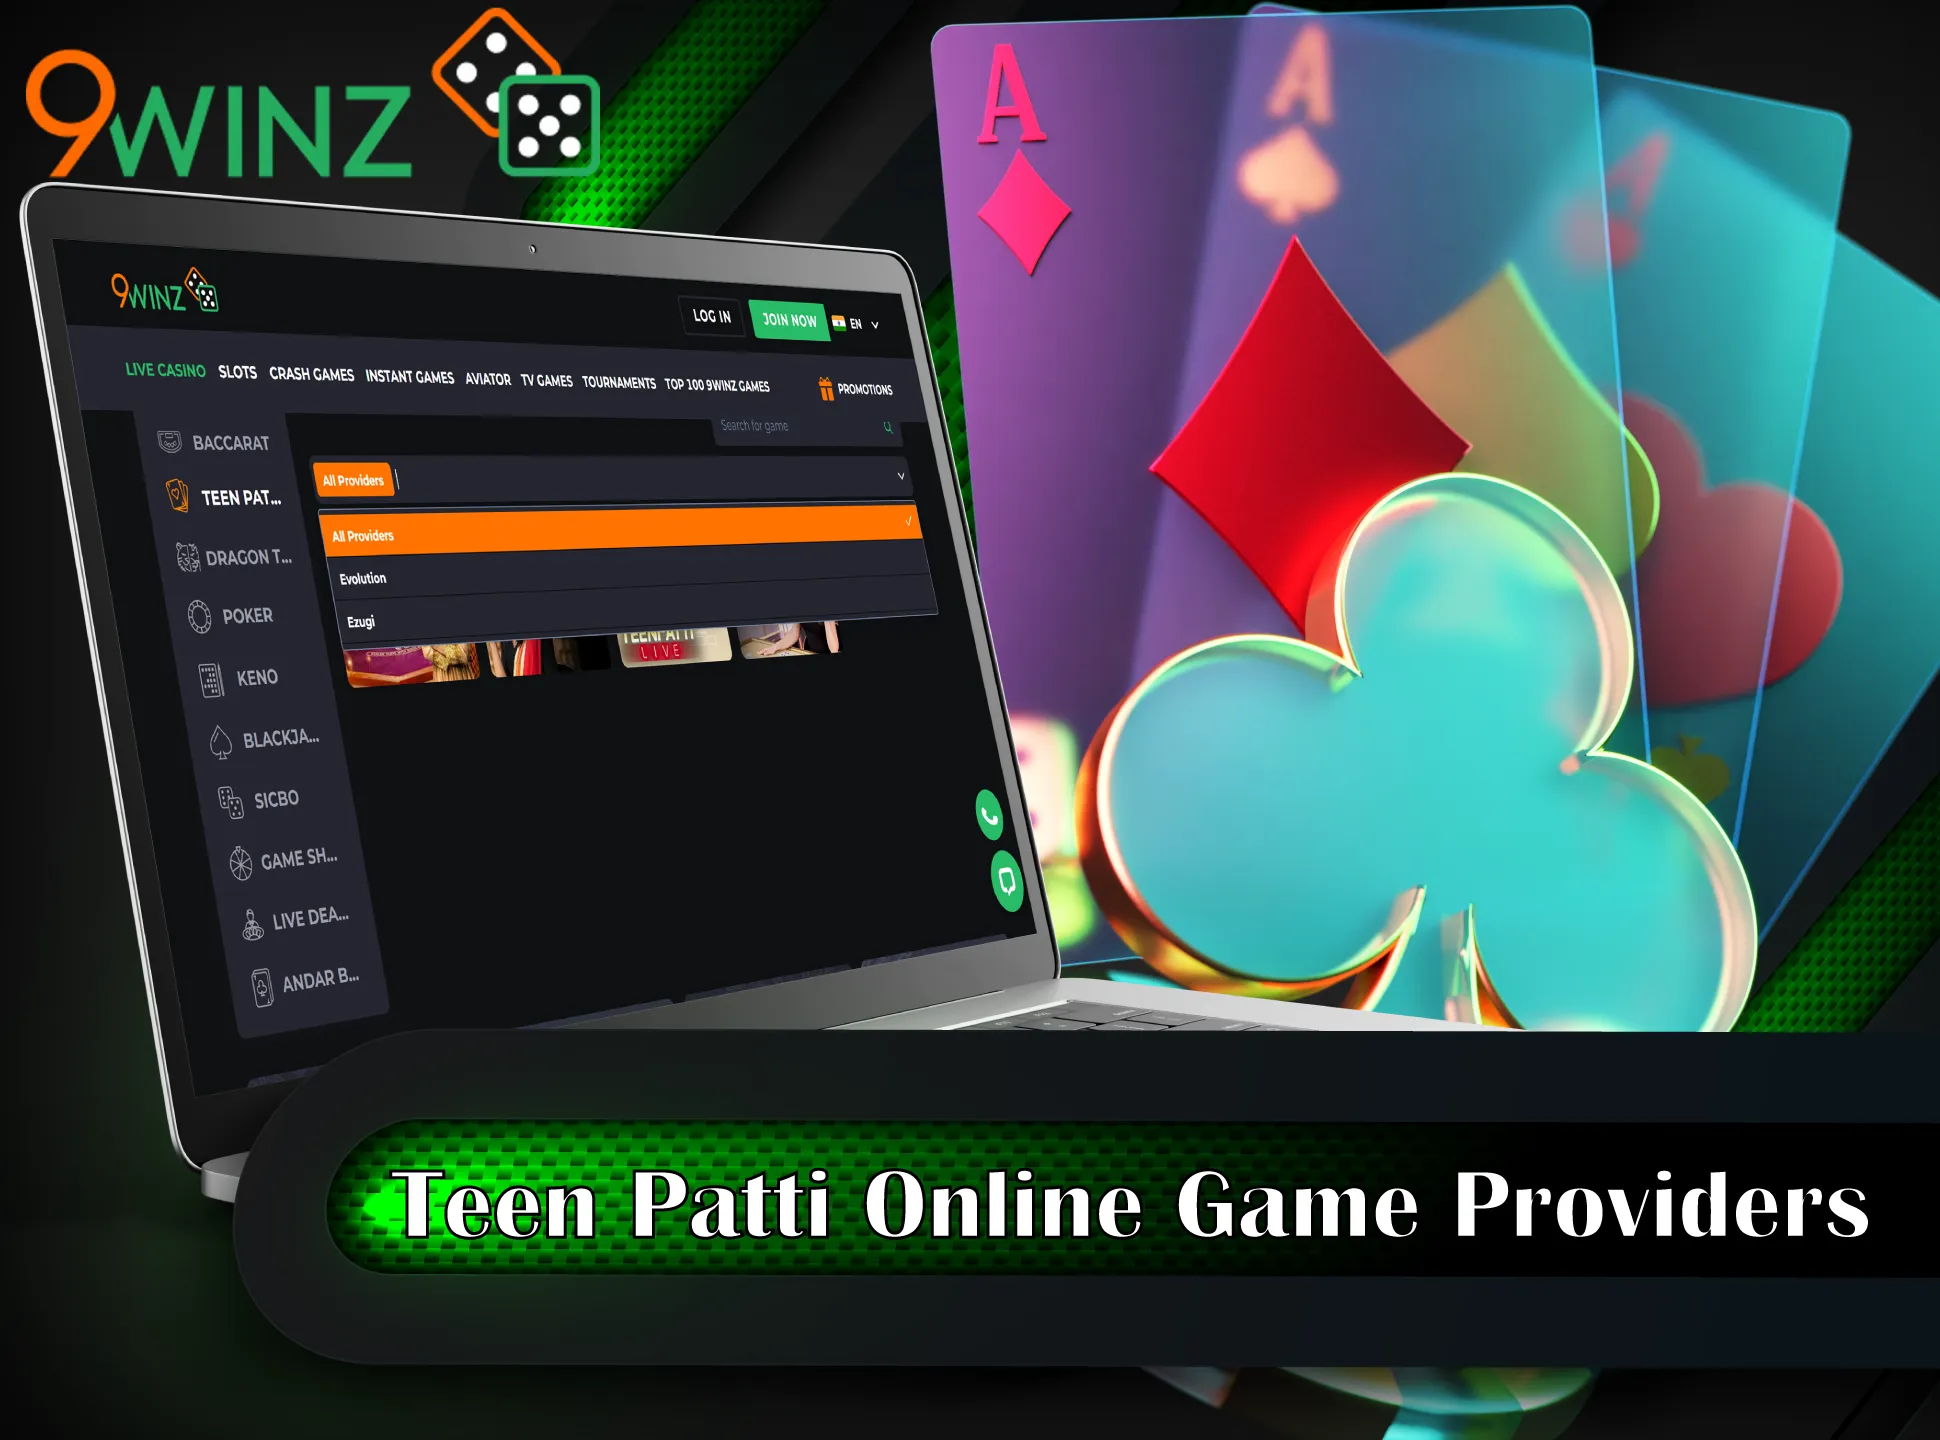 Teen Patti is provided by the lead games developers.